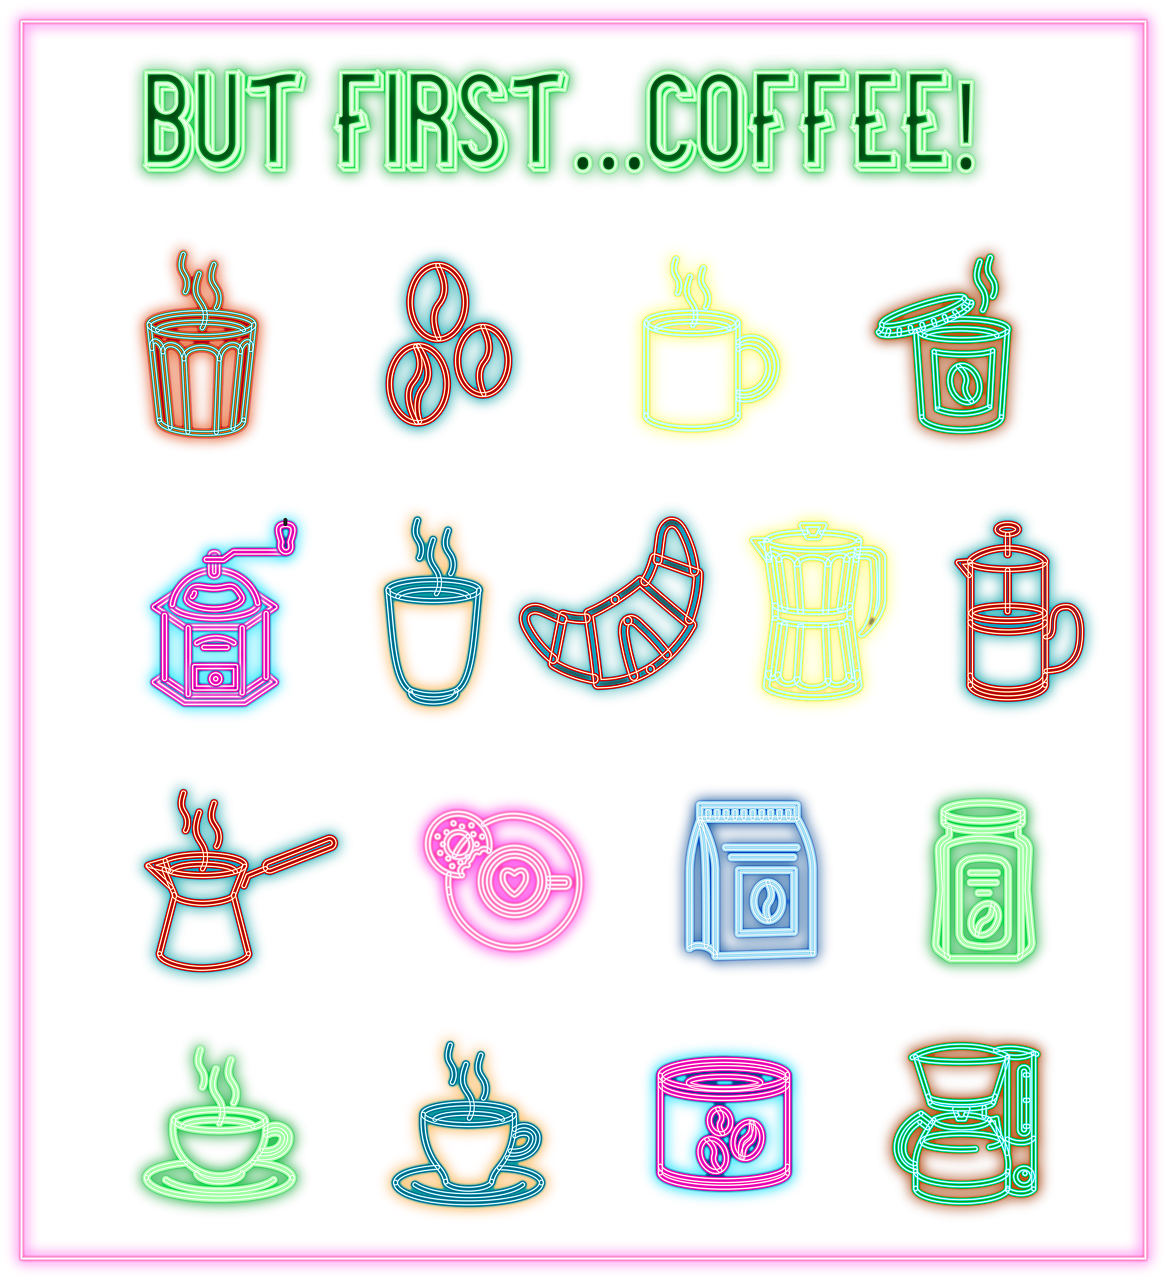 a picture of a sign that says but first coffee, concept art, flickr, pop art, neon madhubani, vfx spritesheet!!!!!, blacklight, yummy